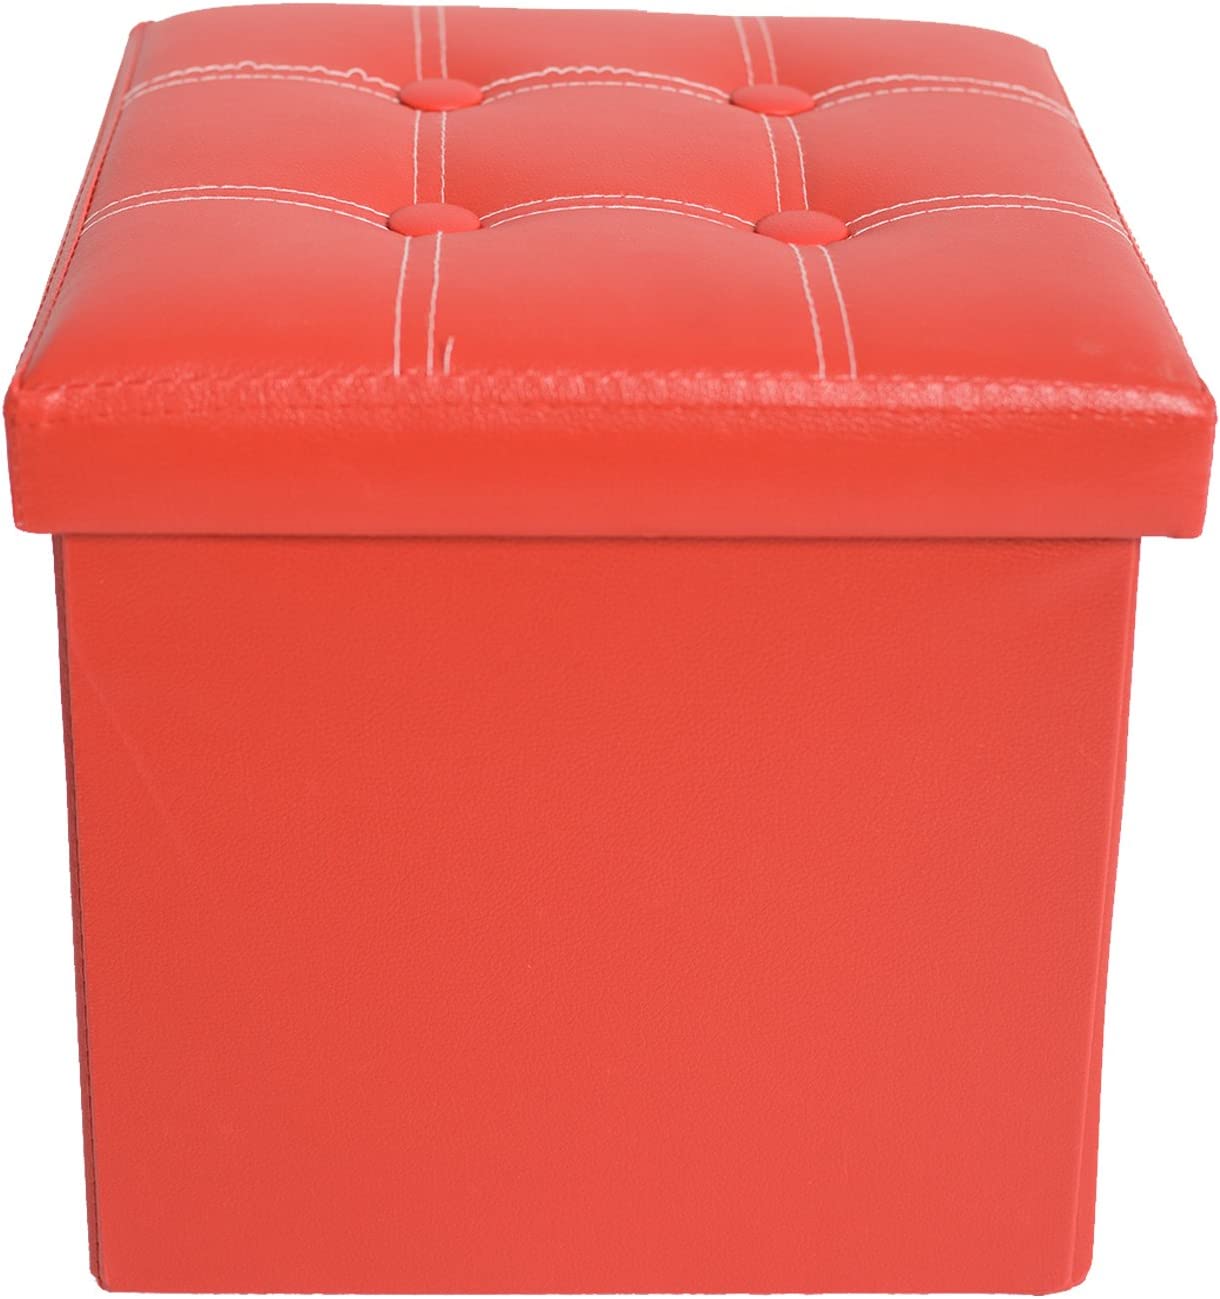 Bench Seat Cube Storage Box Faux Leather Red | HOG-Home. Office. Garden online marketplace